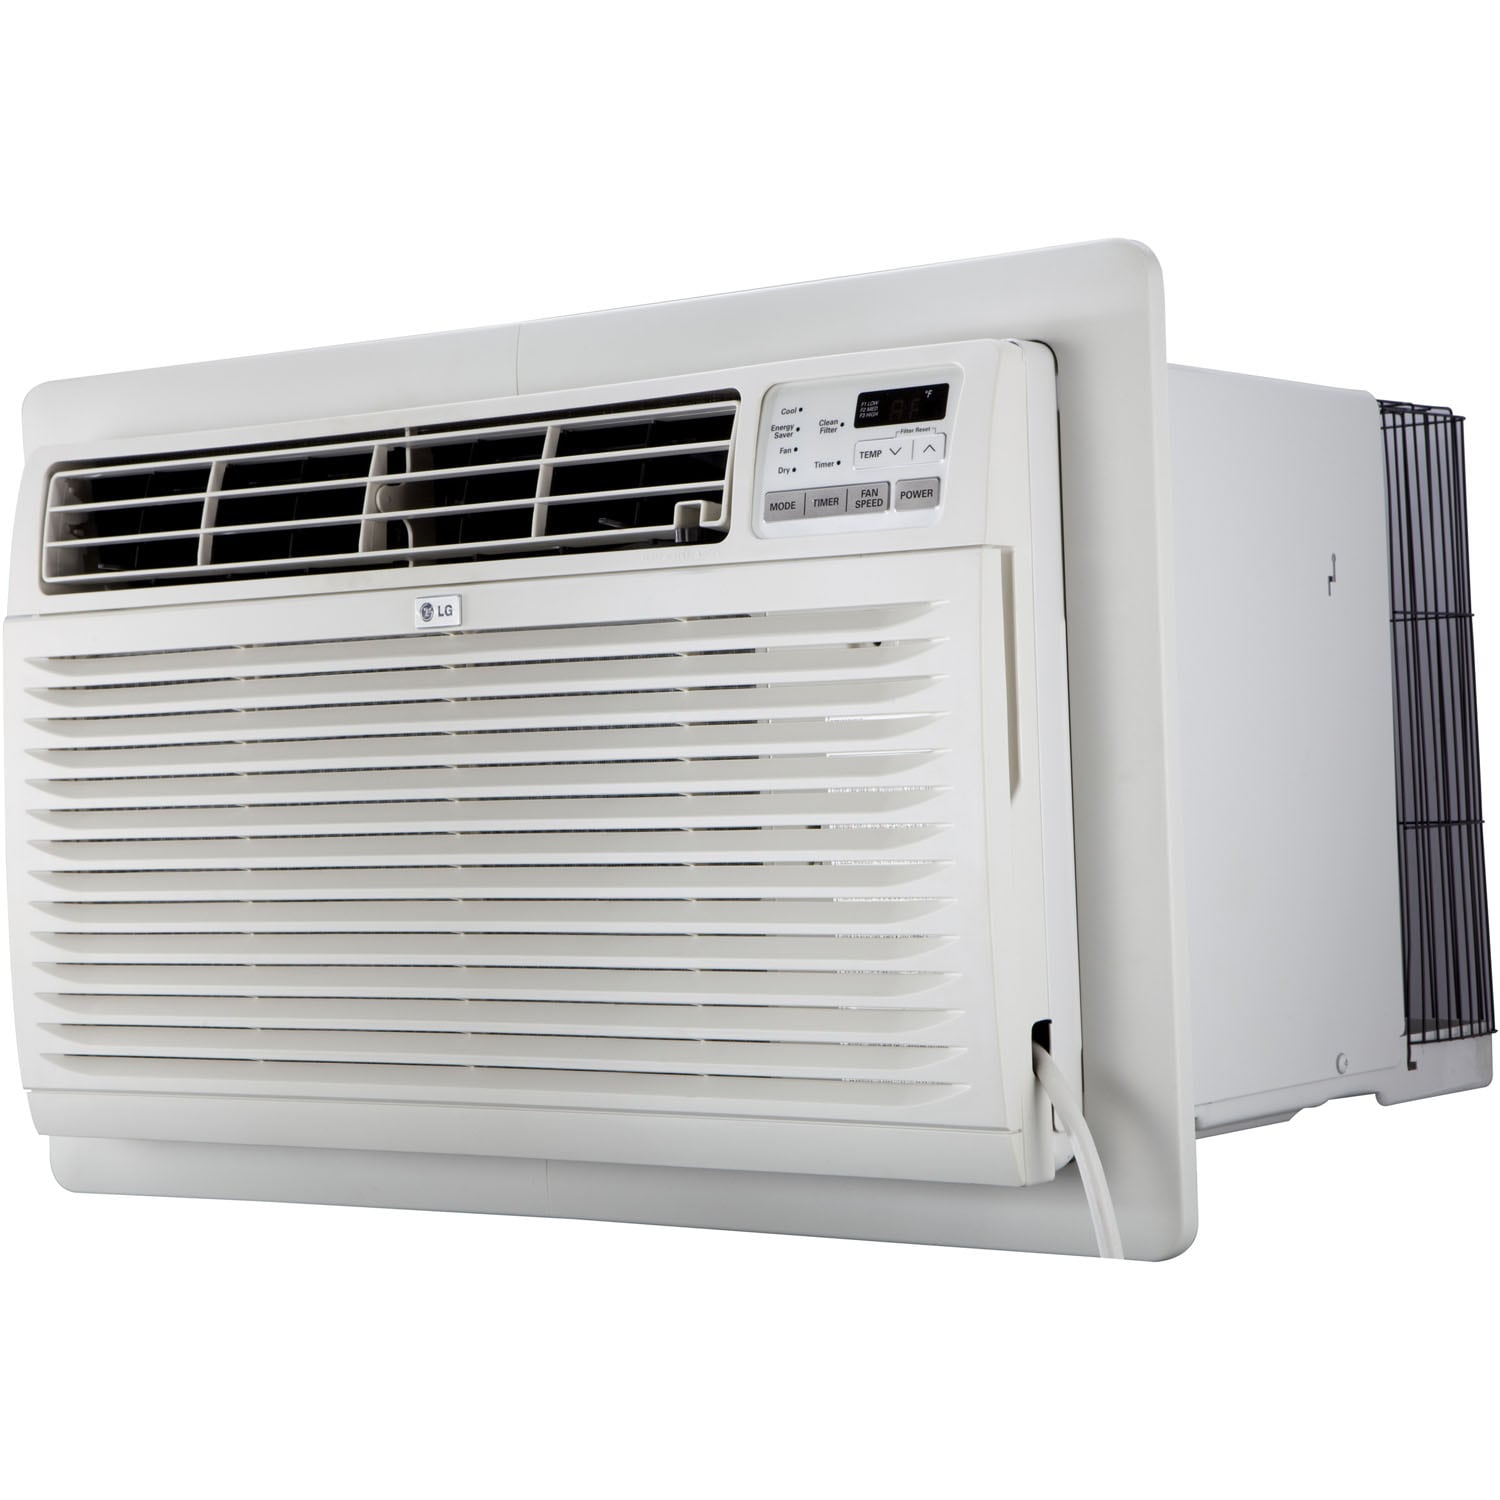 Wall-Mounted Air-Conditioners